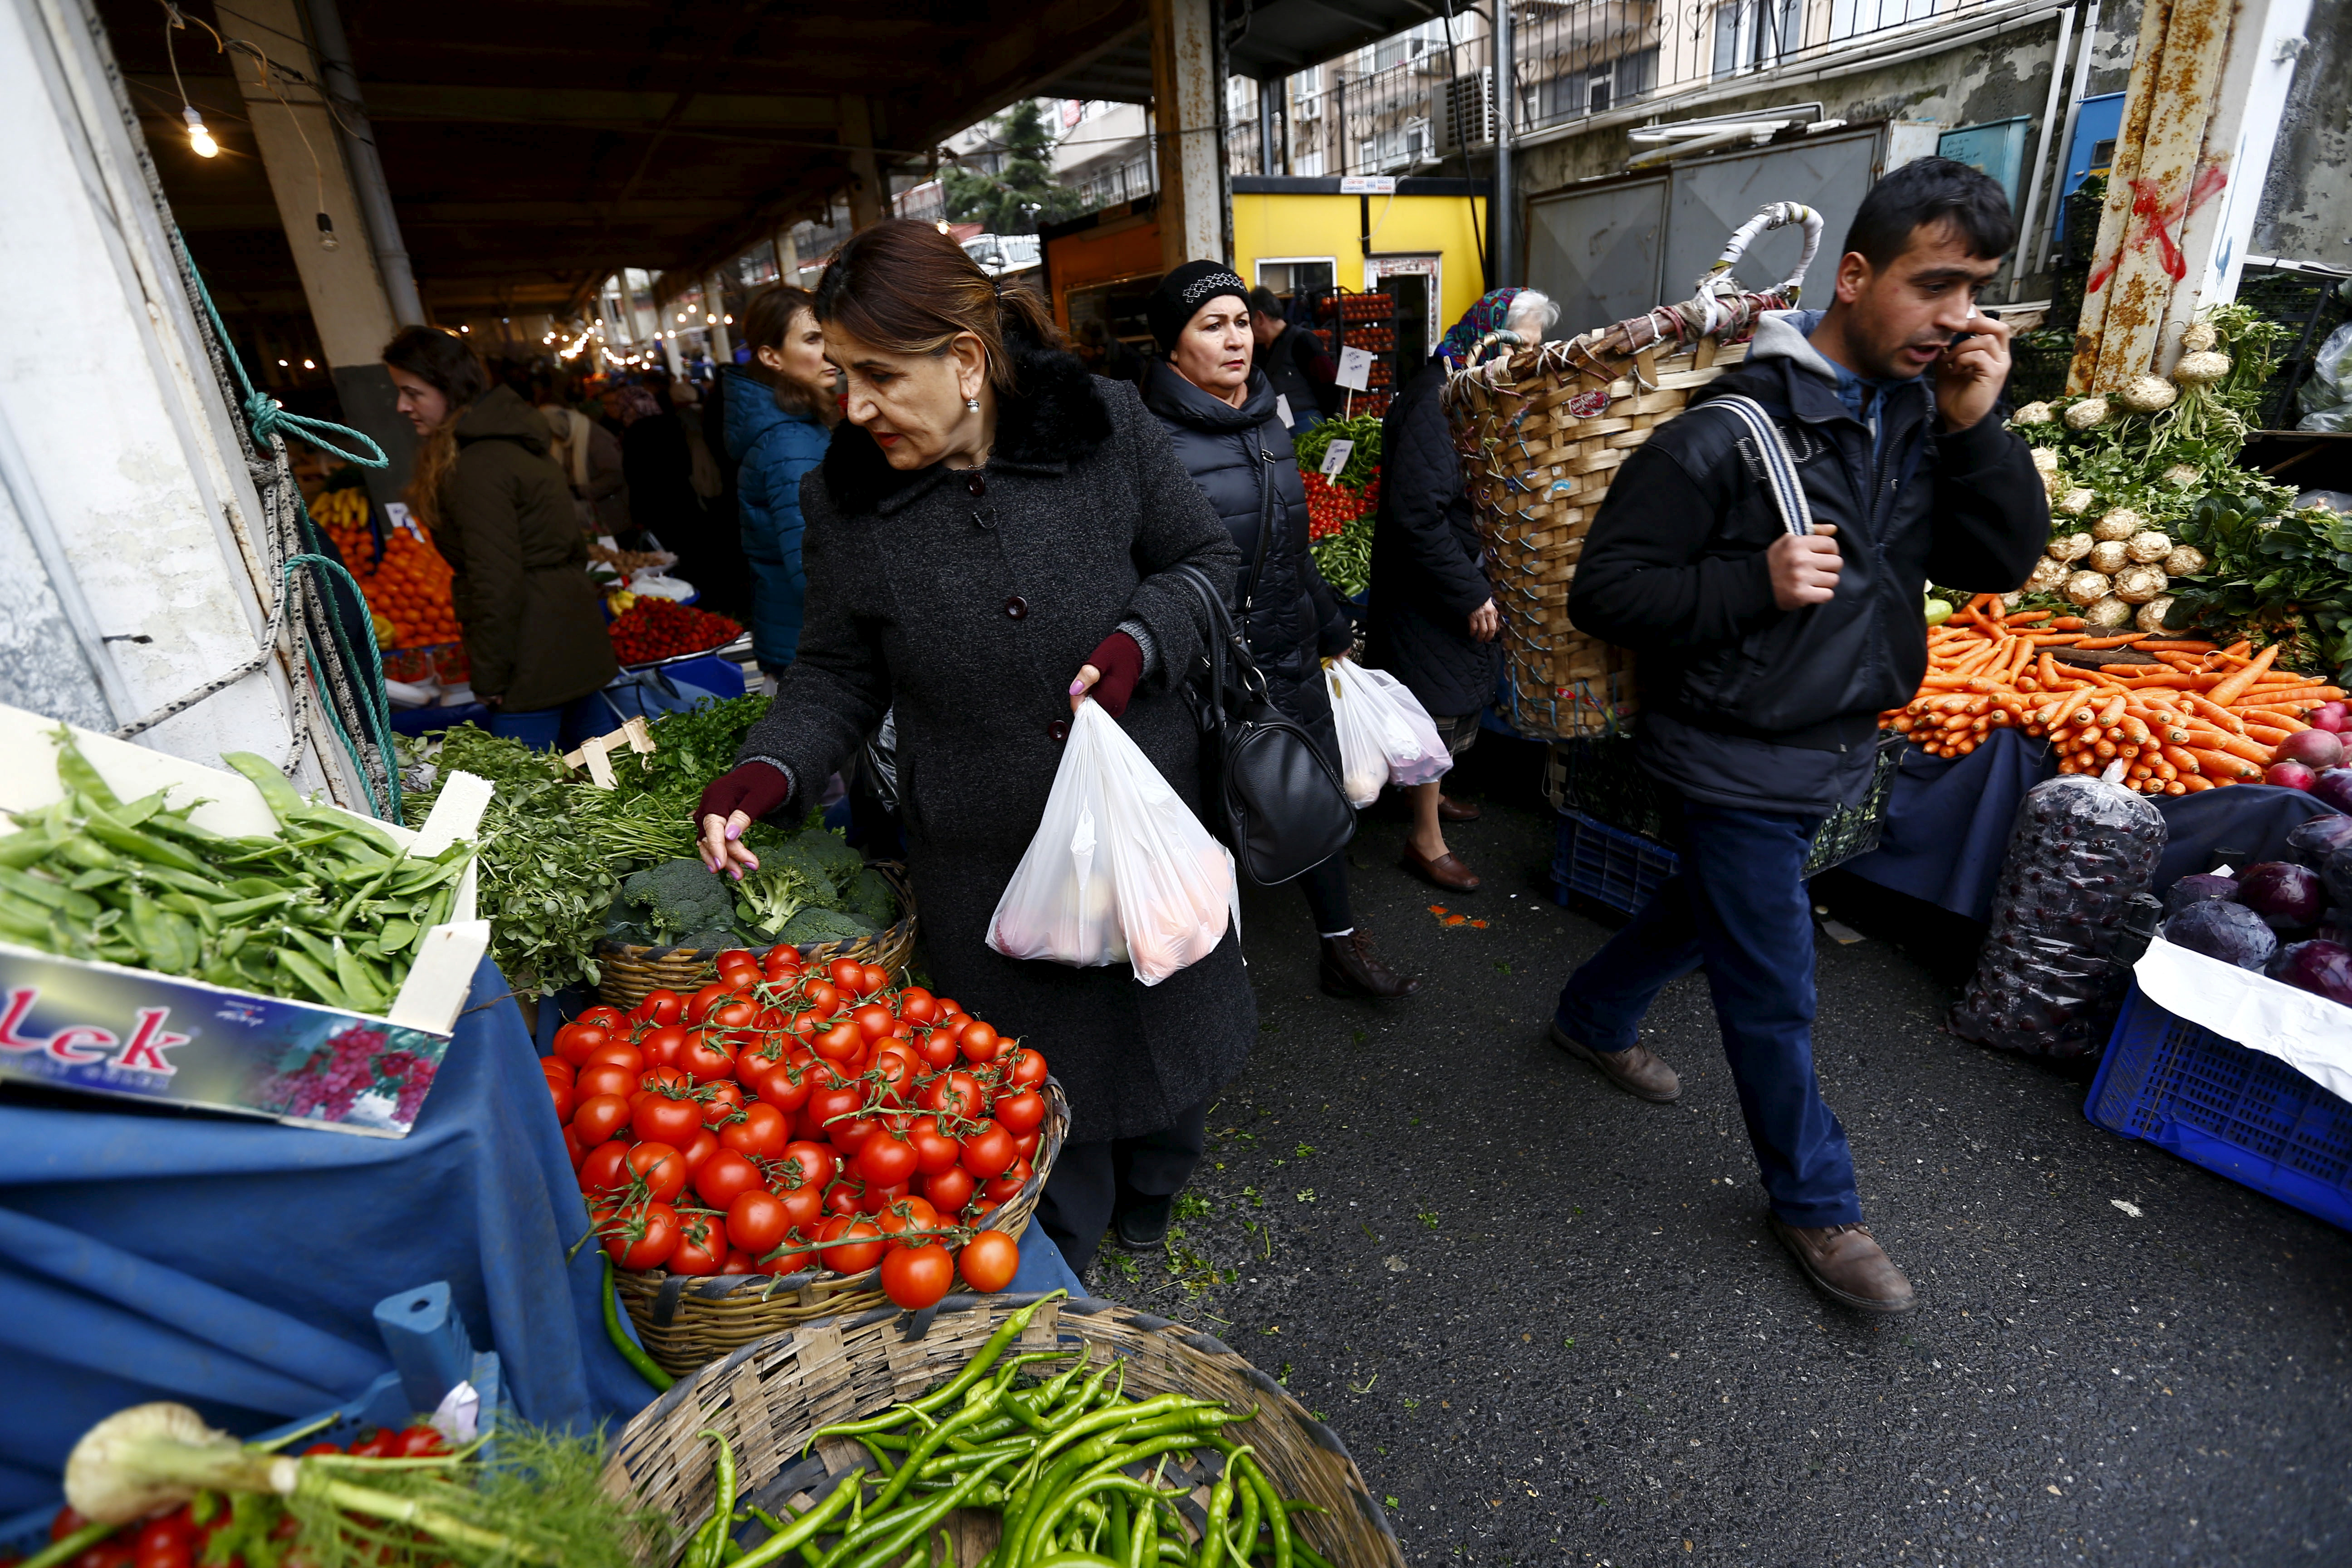 Gulsen Yuce shops at a bazaar in Istanbul Turkey January 30, 2016. Standing amid a jumble of food stalls in an Istanbul market, 61-year-old Yuce wonders how she can stretch an already tight budget to make ends meet as food prices rise